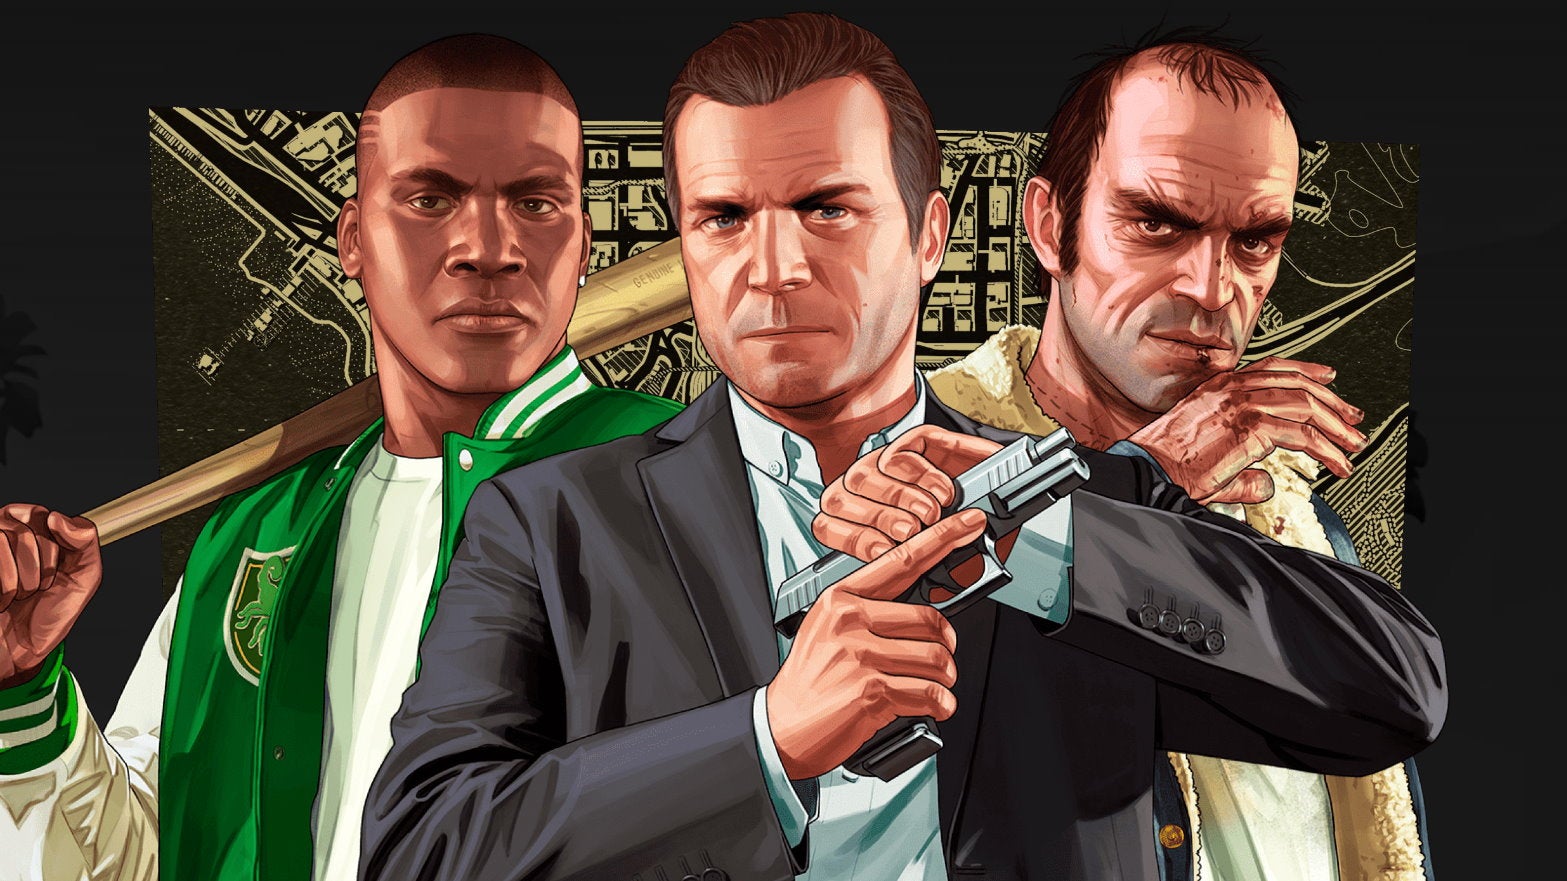 The three main protagonists from Grand Theft Auto 5